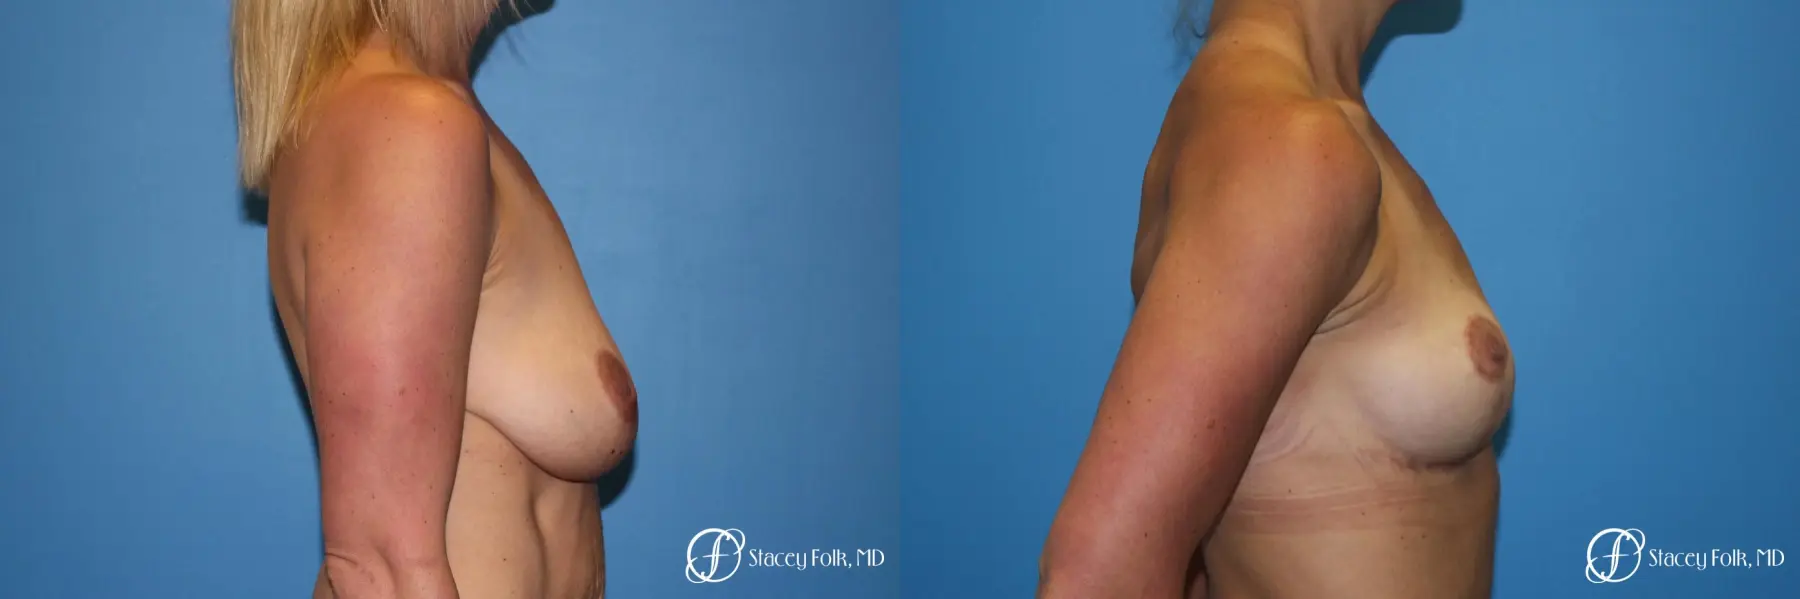 Denver Breast Lift - Mastopexy 8297 - Before and After 3